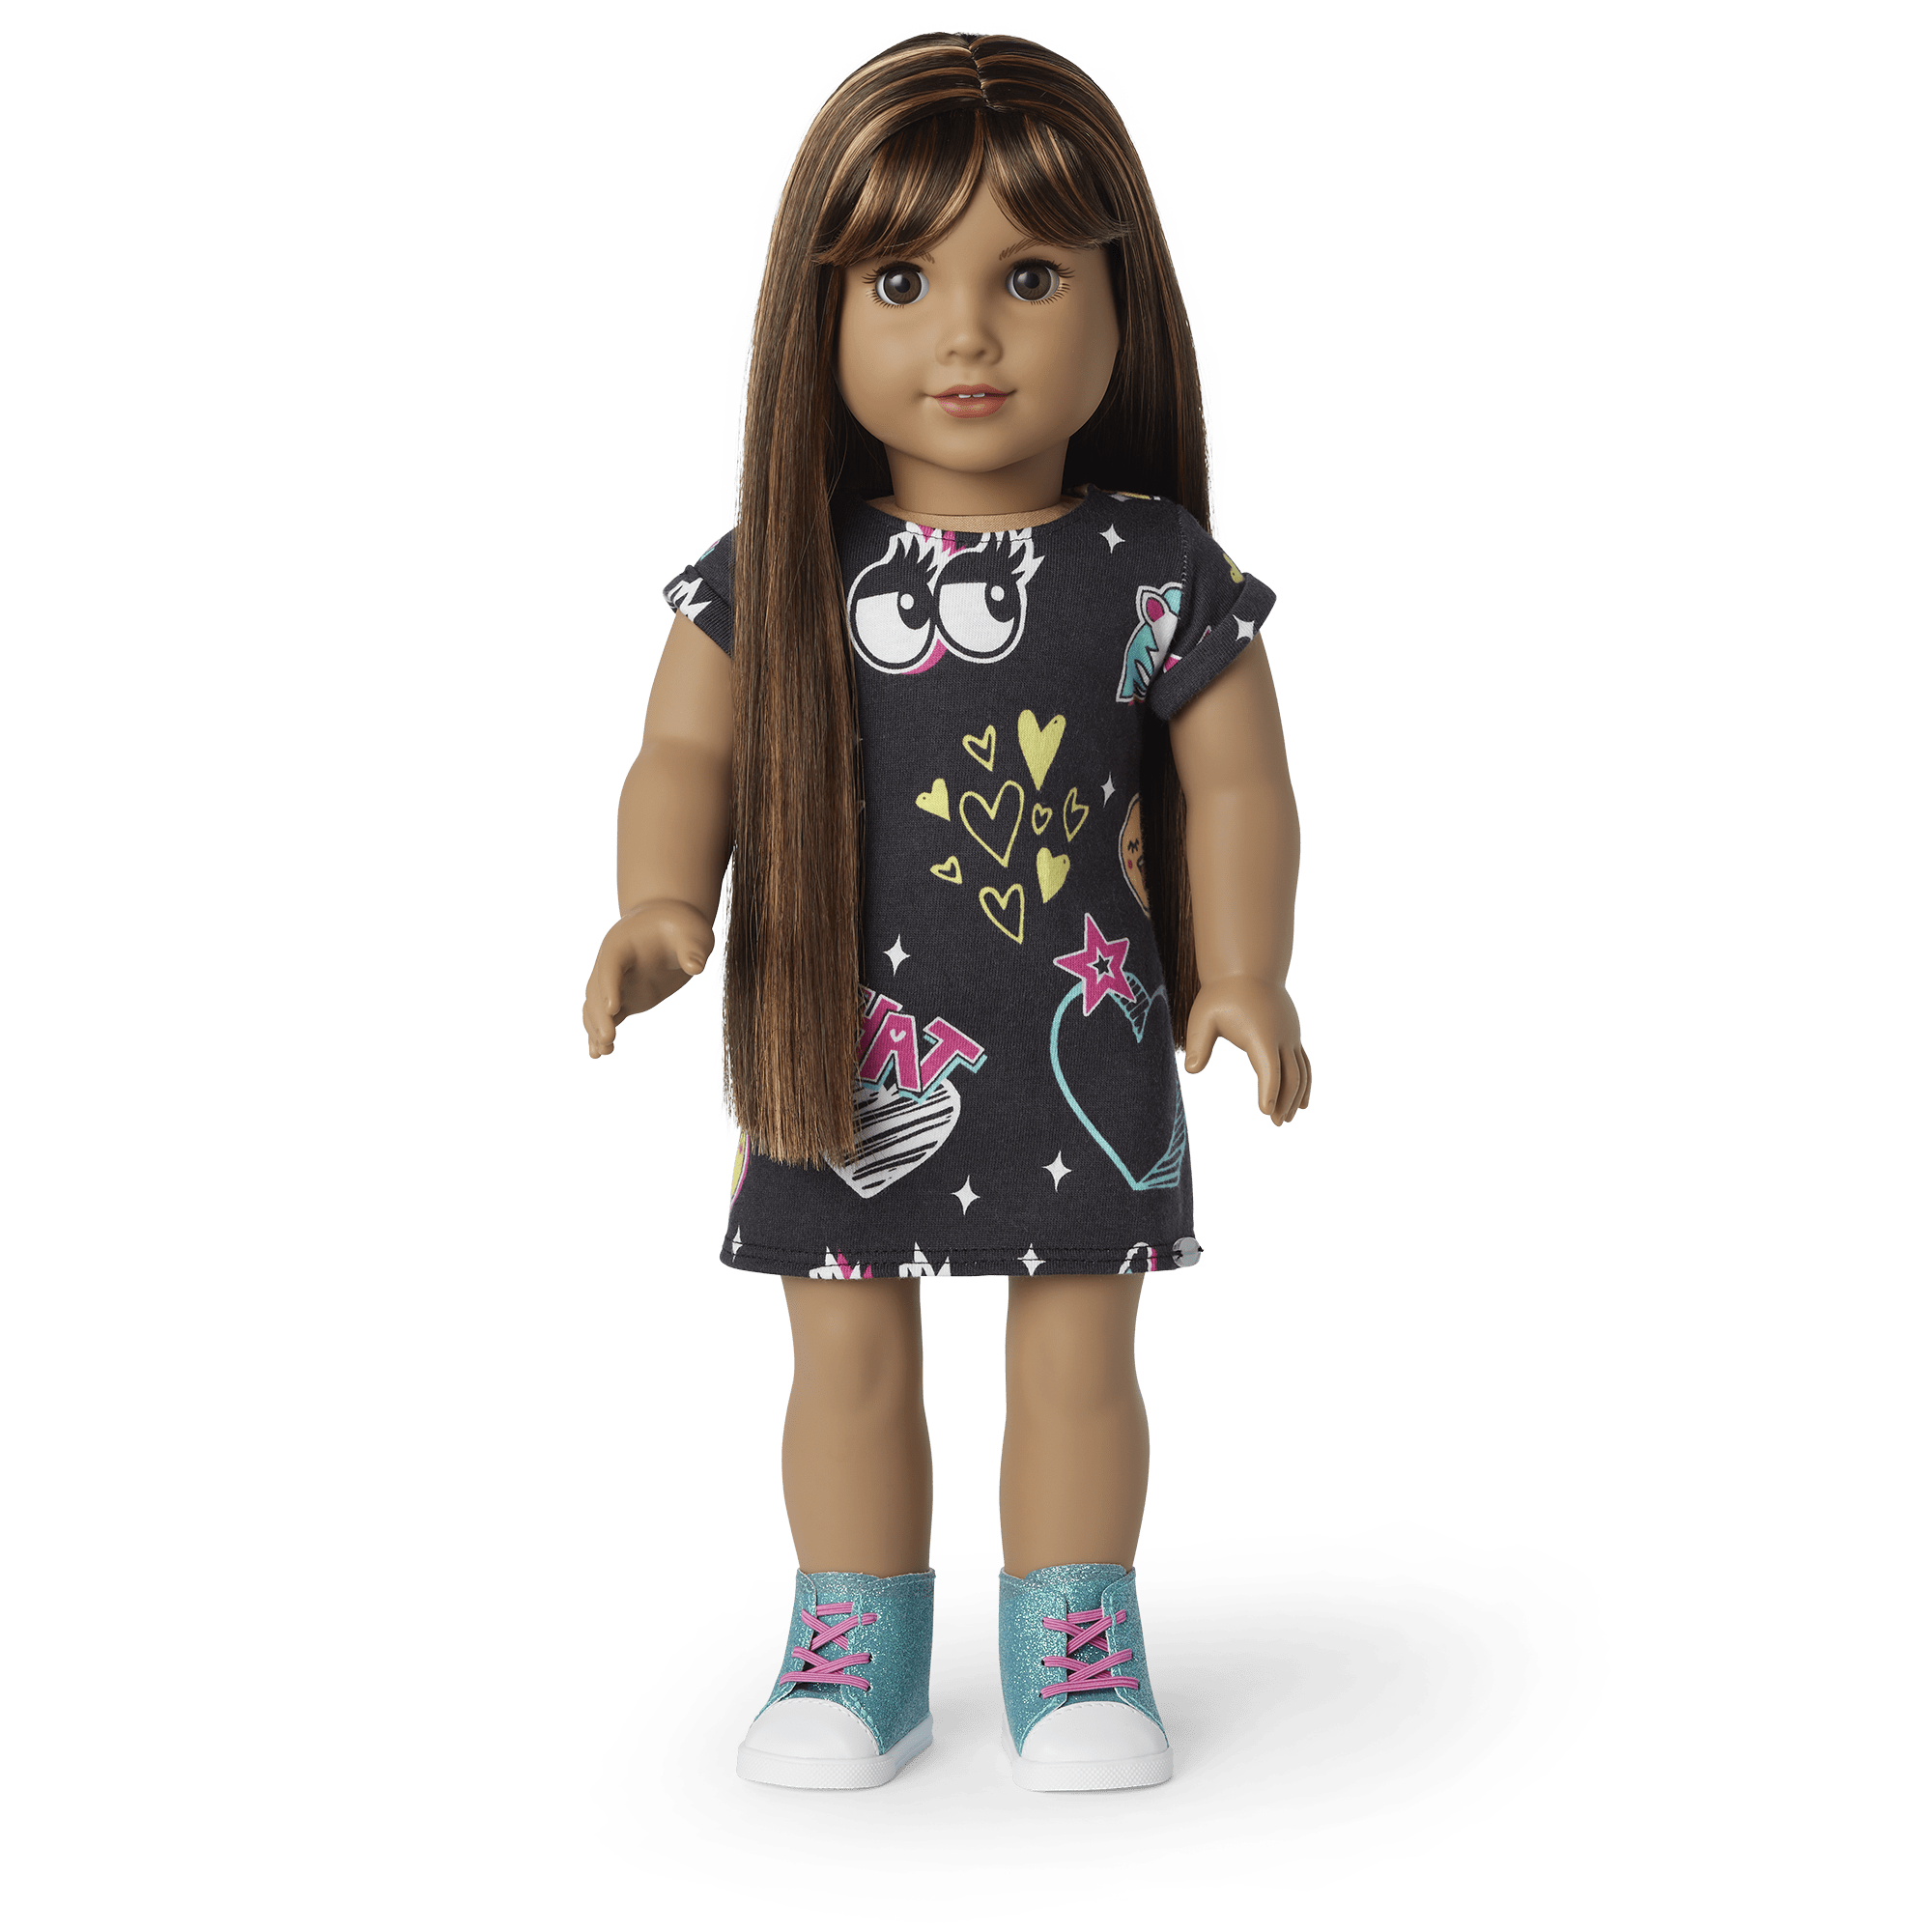 XFEYUE All Occasions American Girl Doll Clothes, 18-Inch